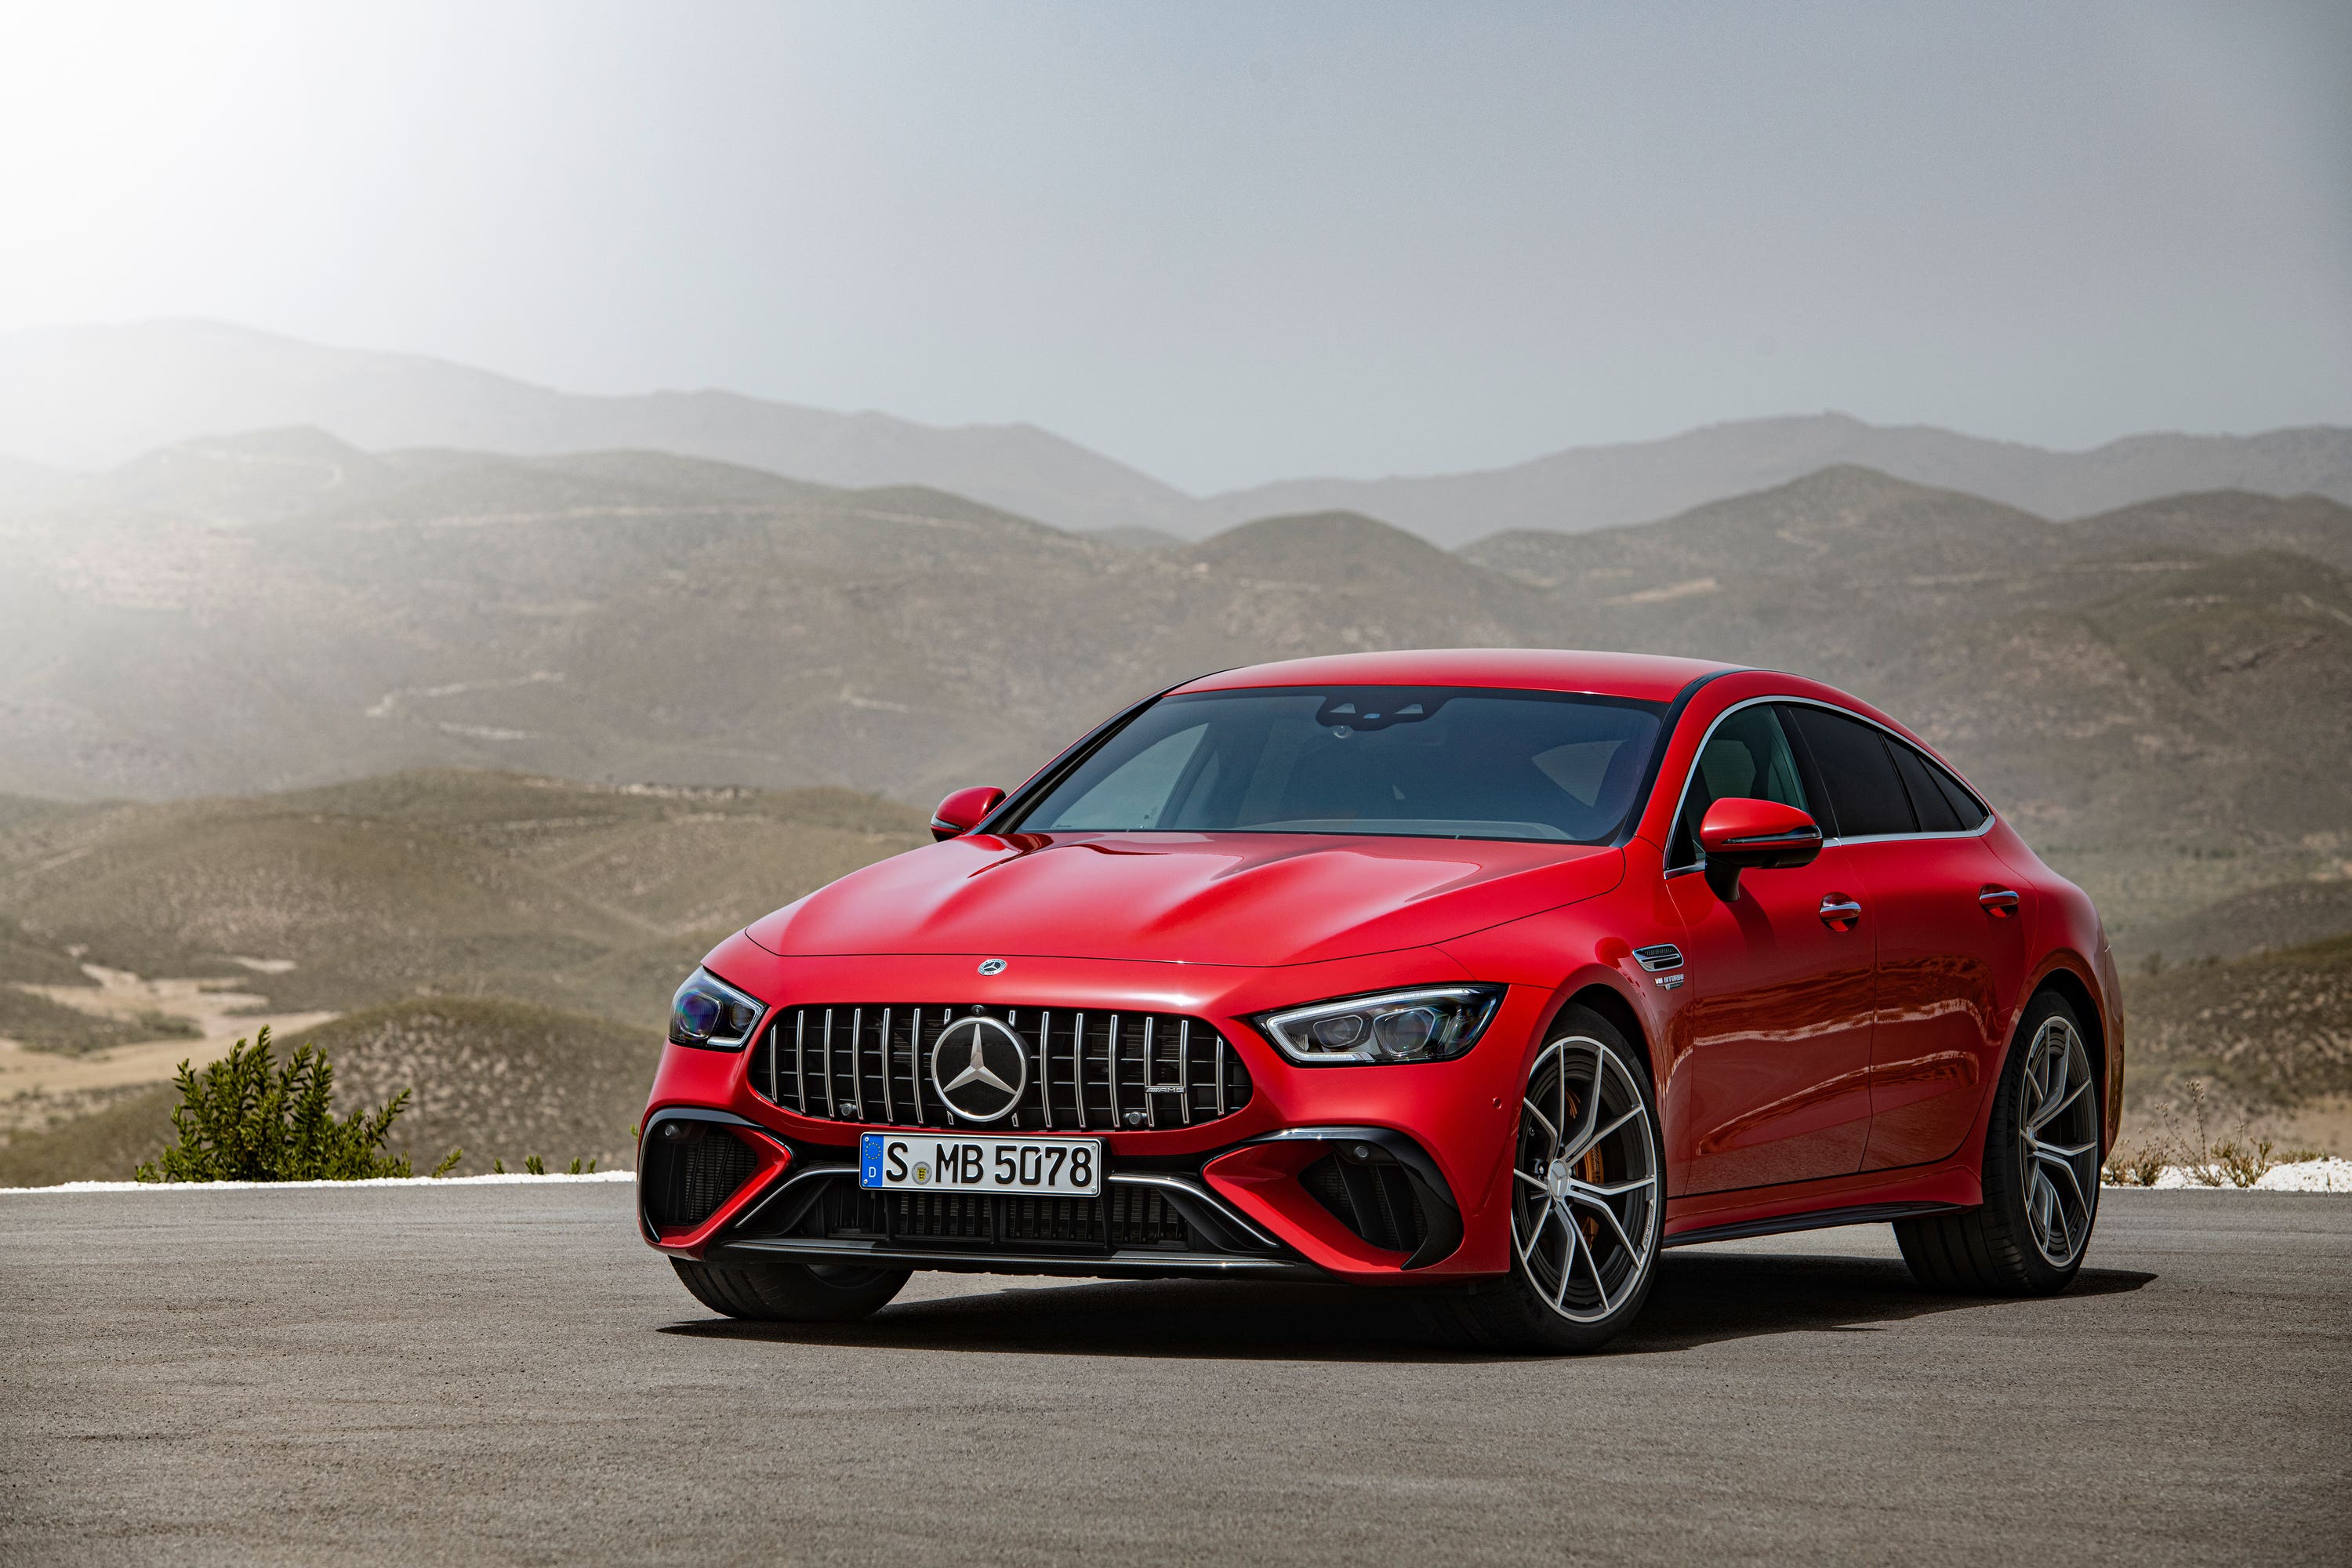 Mercedes-Amg Gt 63 E S: Its Most Powerful Car Ever - Bloomberg